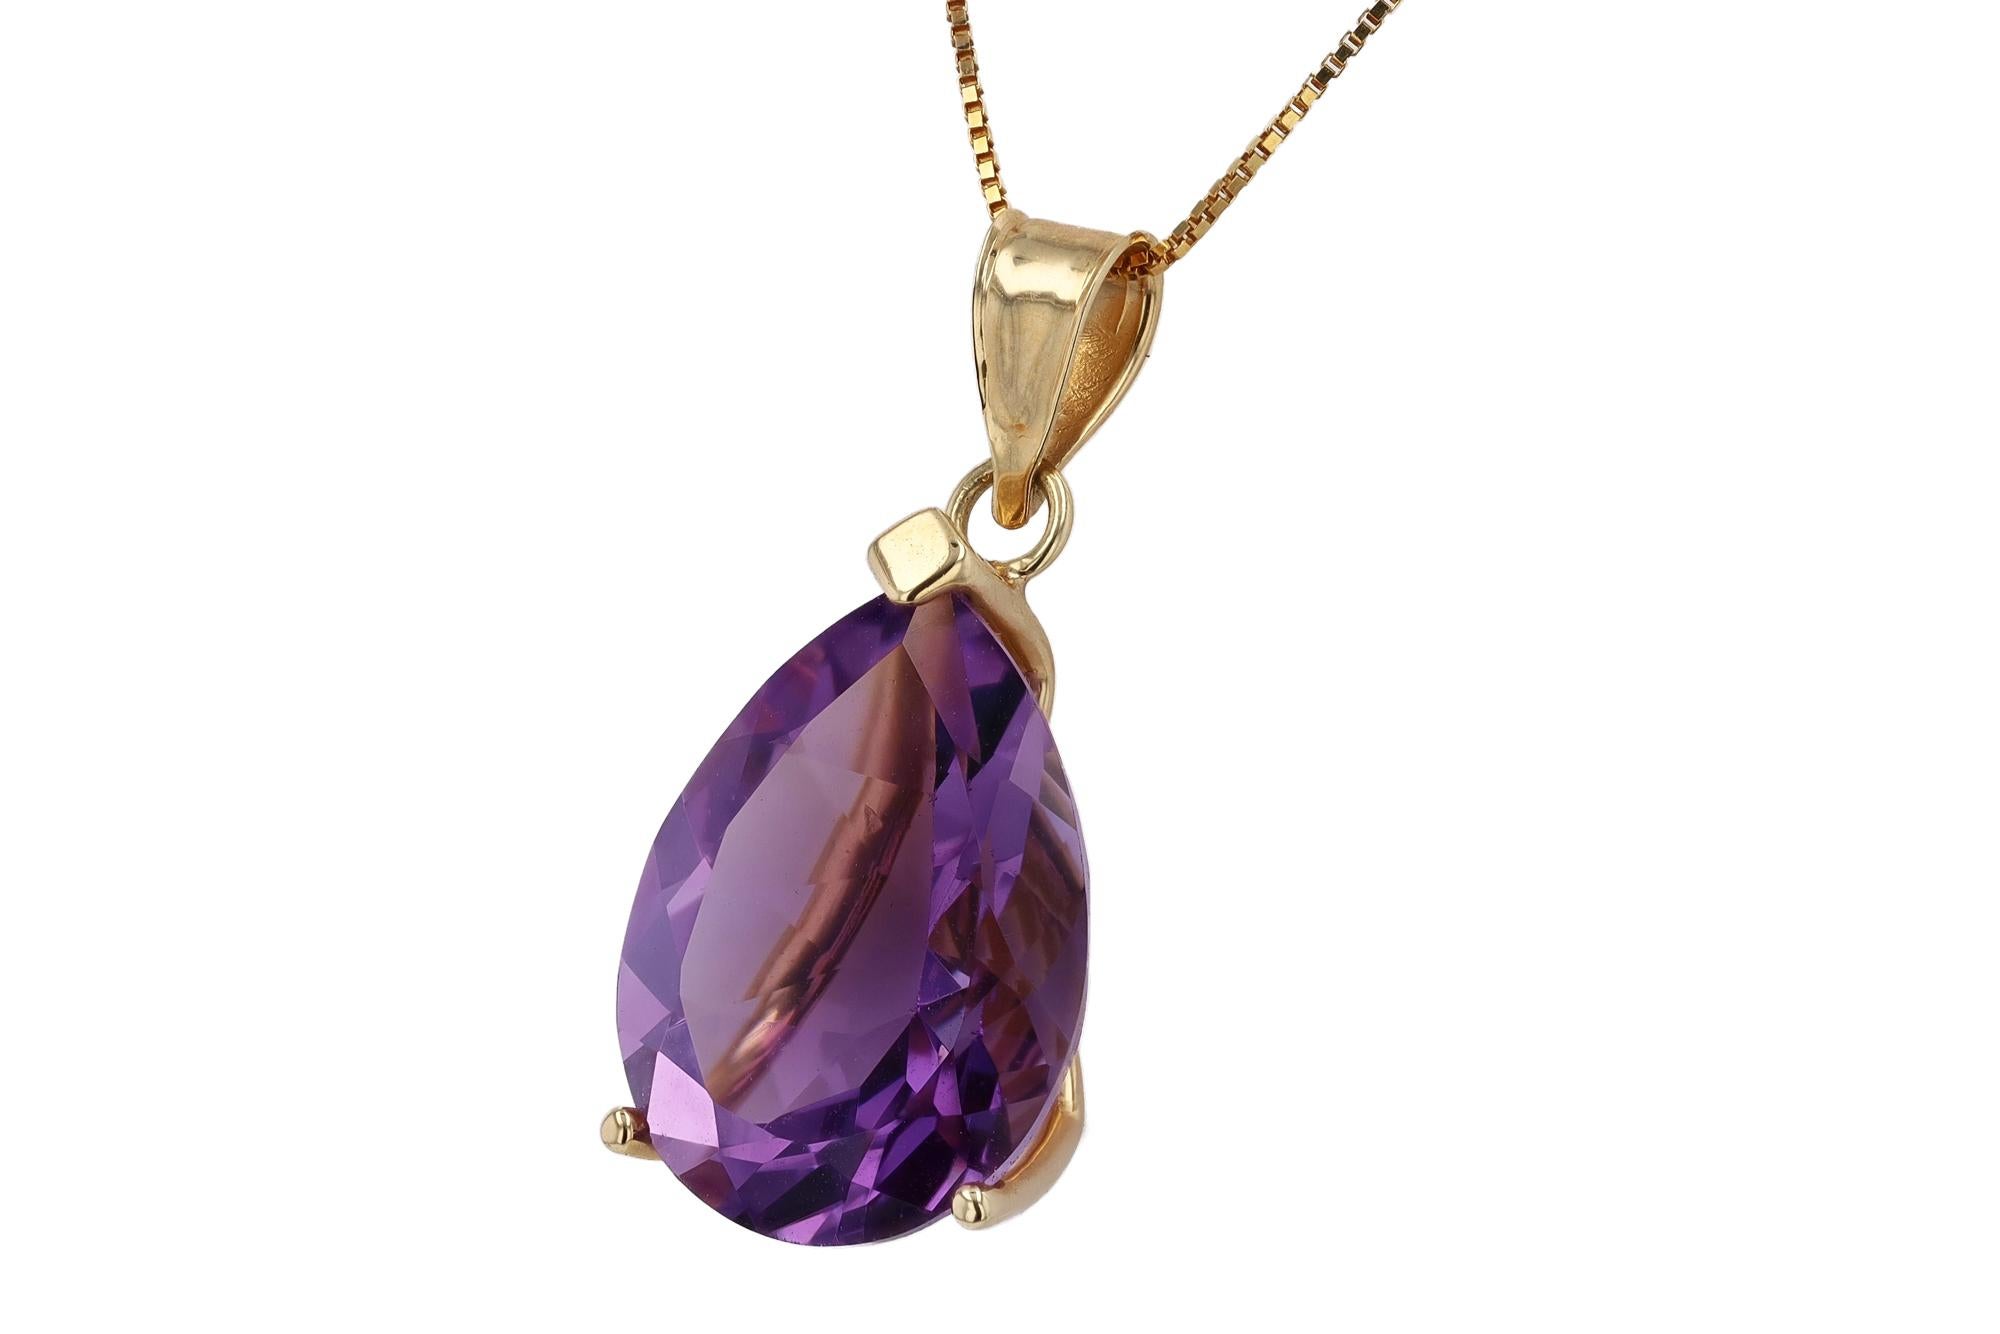 Sustainable and attainable, this vintage amethyst pear shaped pendant is equal parts affordable and luxurious. Artisan crafted with 14k yellow gold suspended from a silky box chain. The vivid, violet-purple natural gemstone weighs 7.35 carats and is